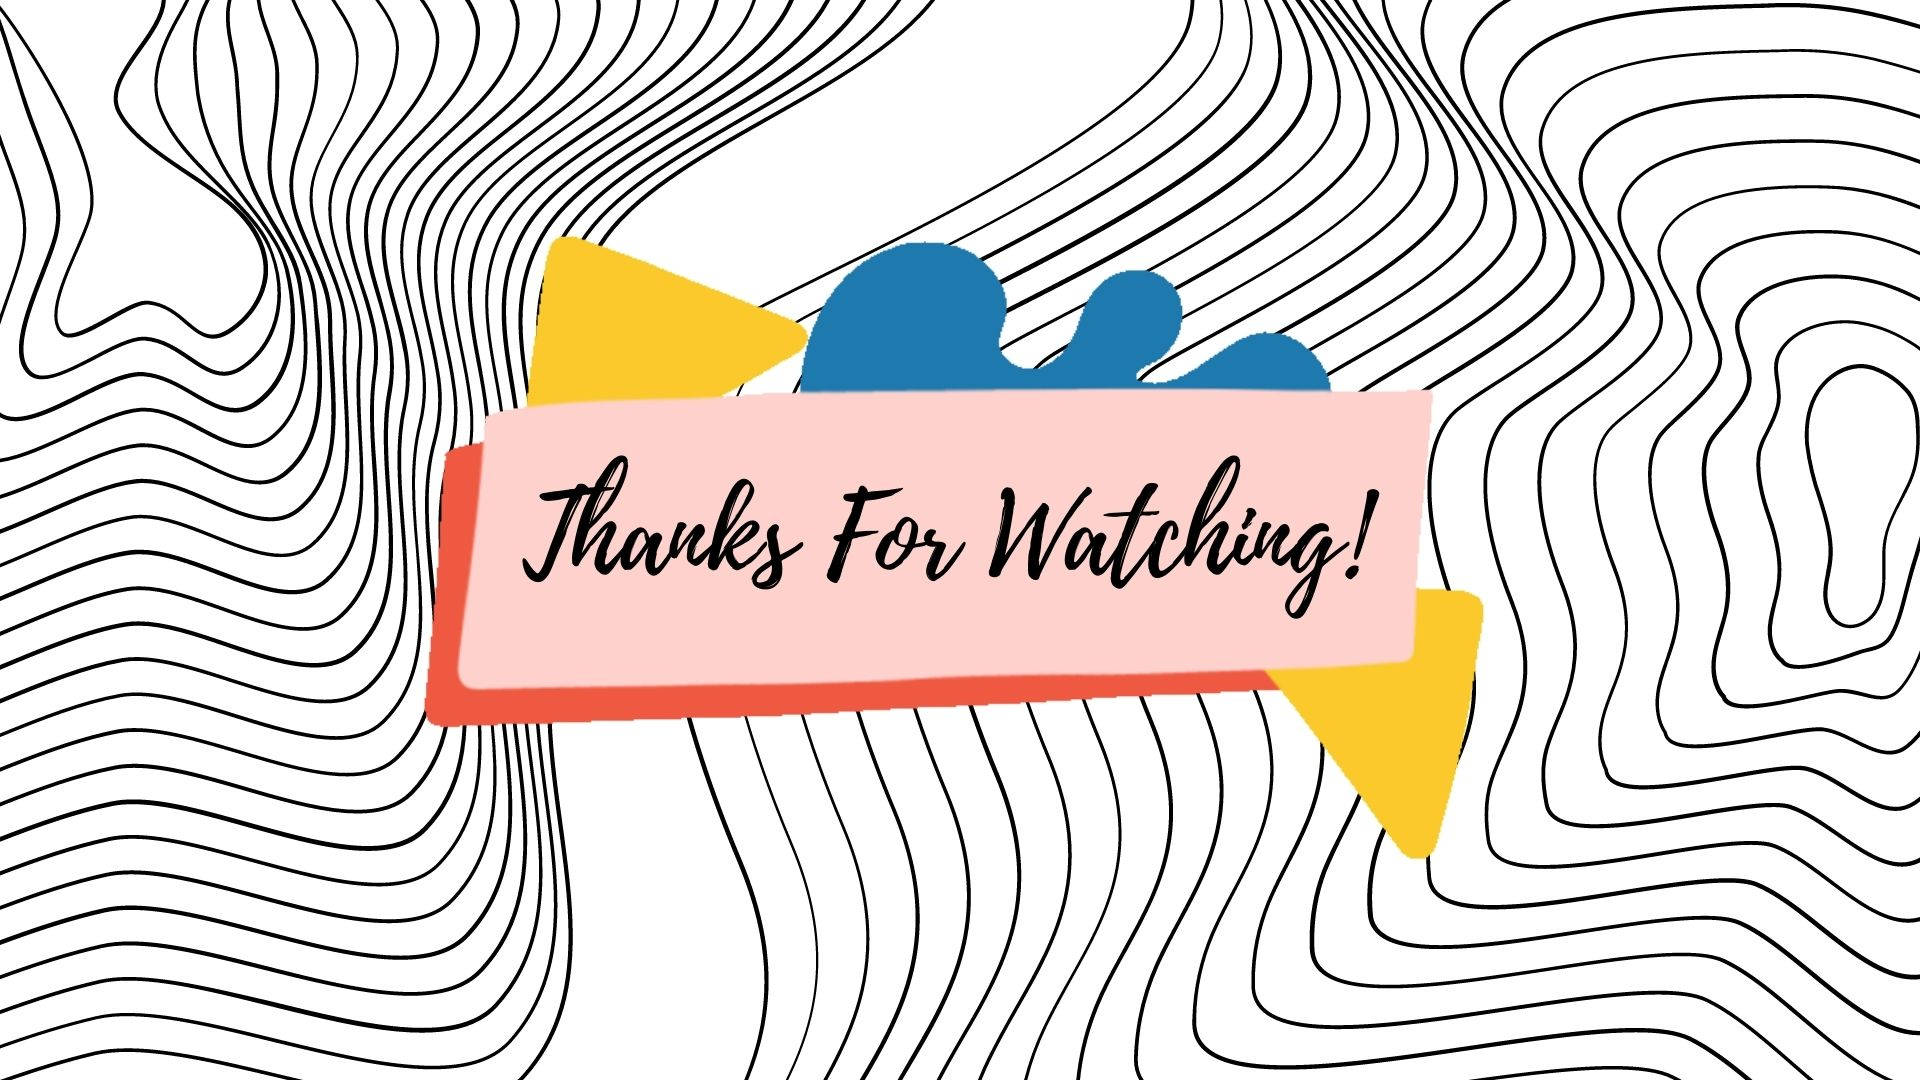 Thanks For Watching Card Geometric Design Background